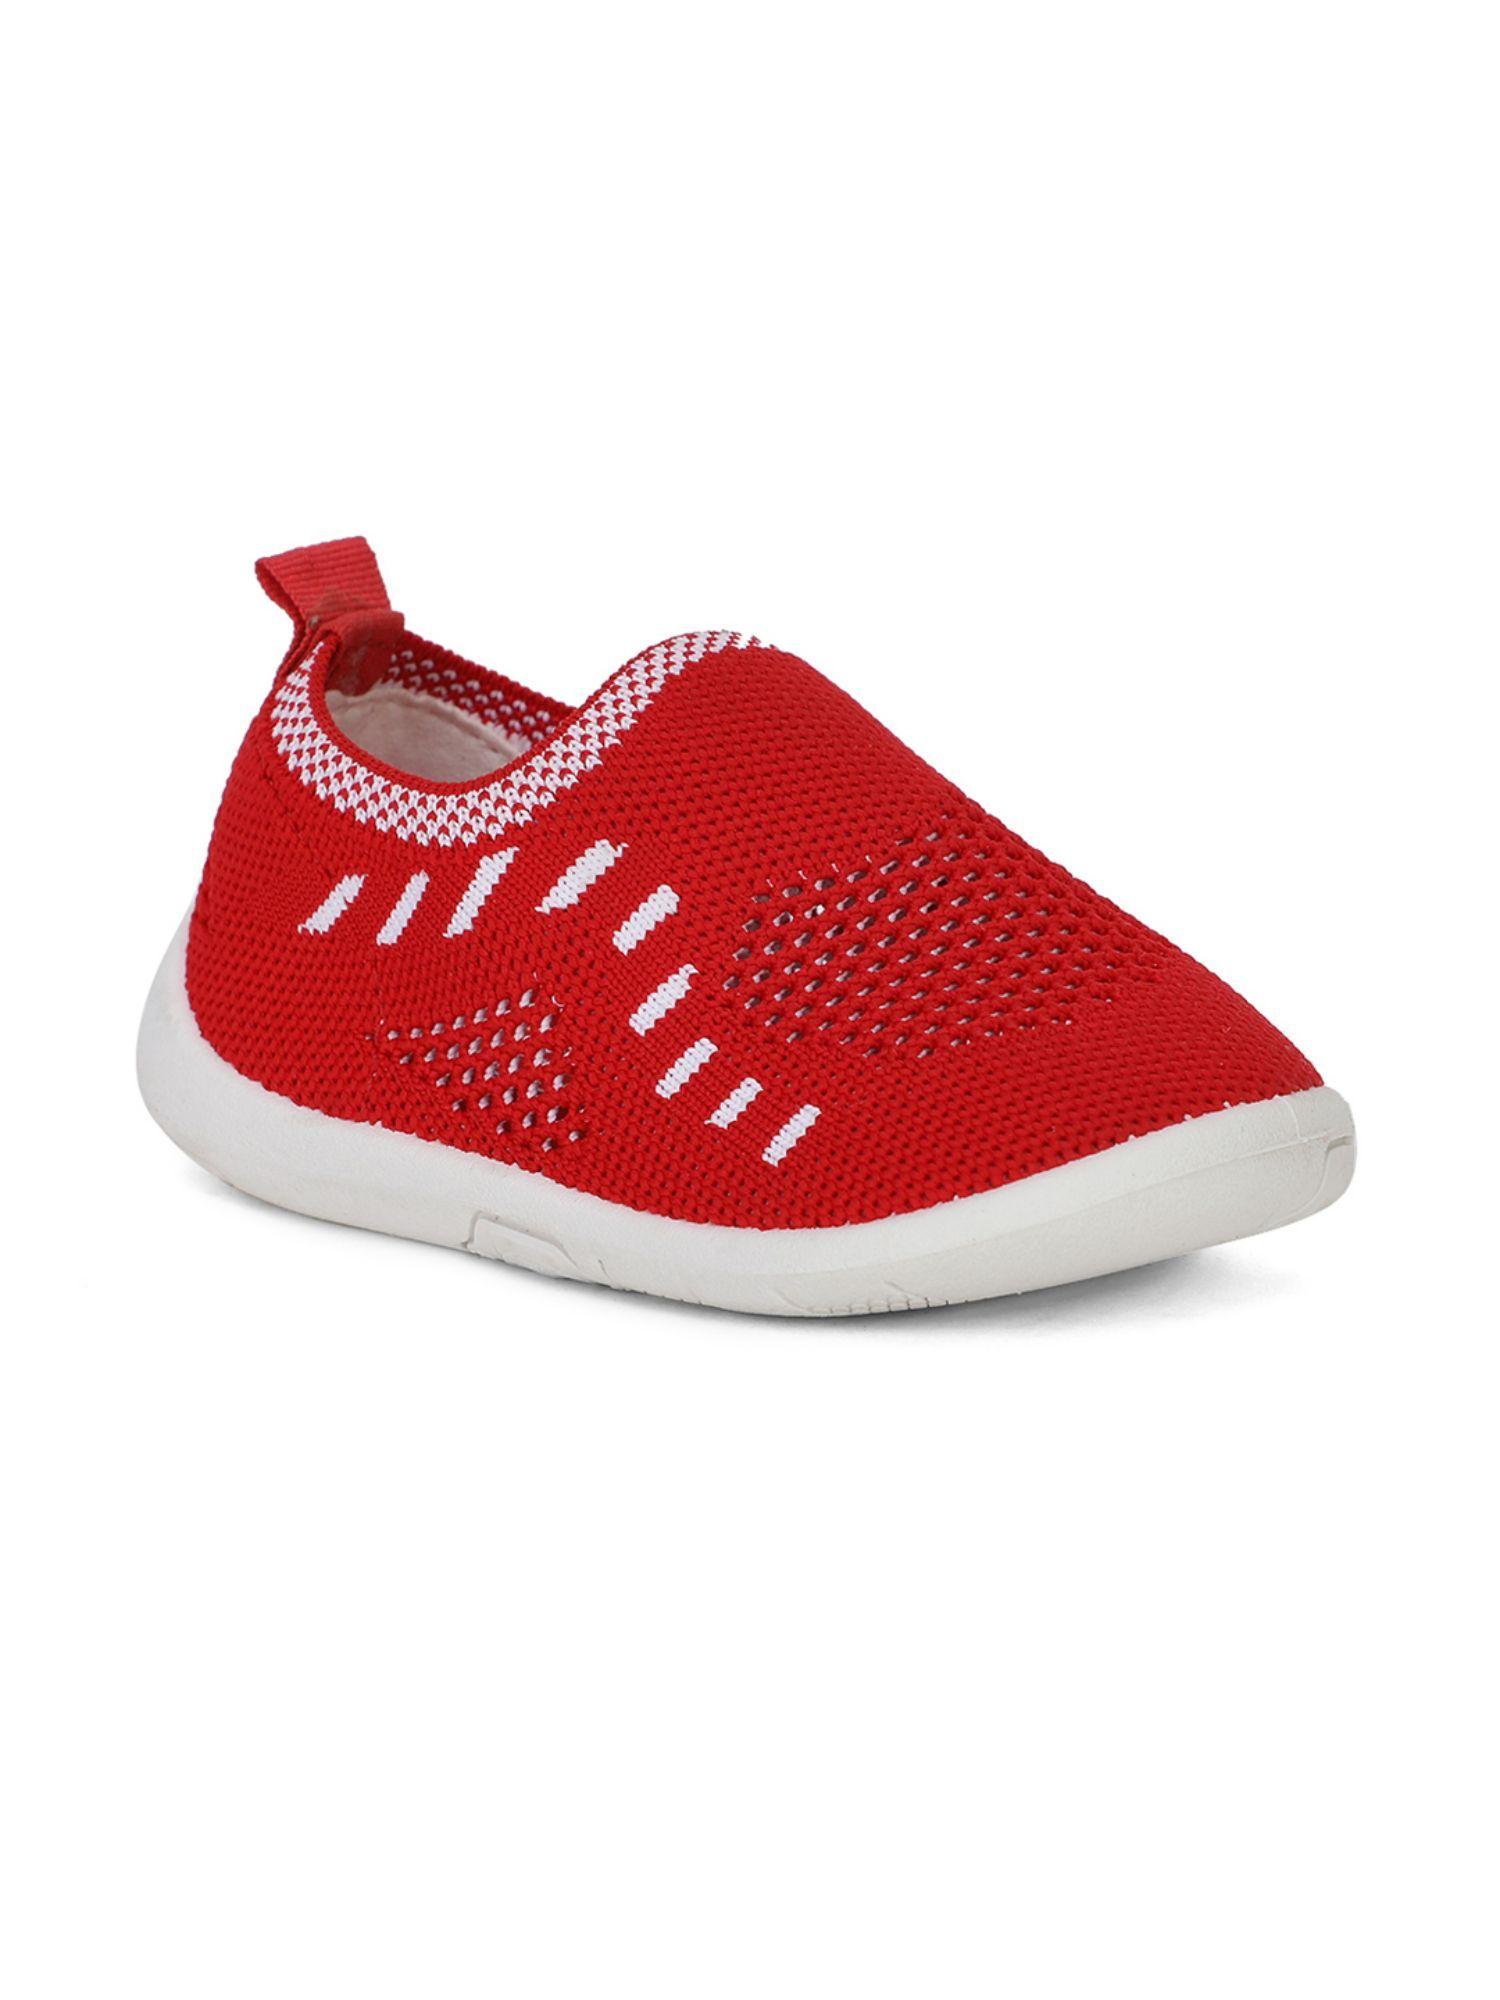 textured red casual shoes